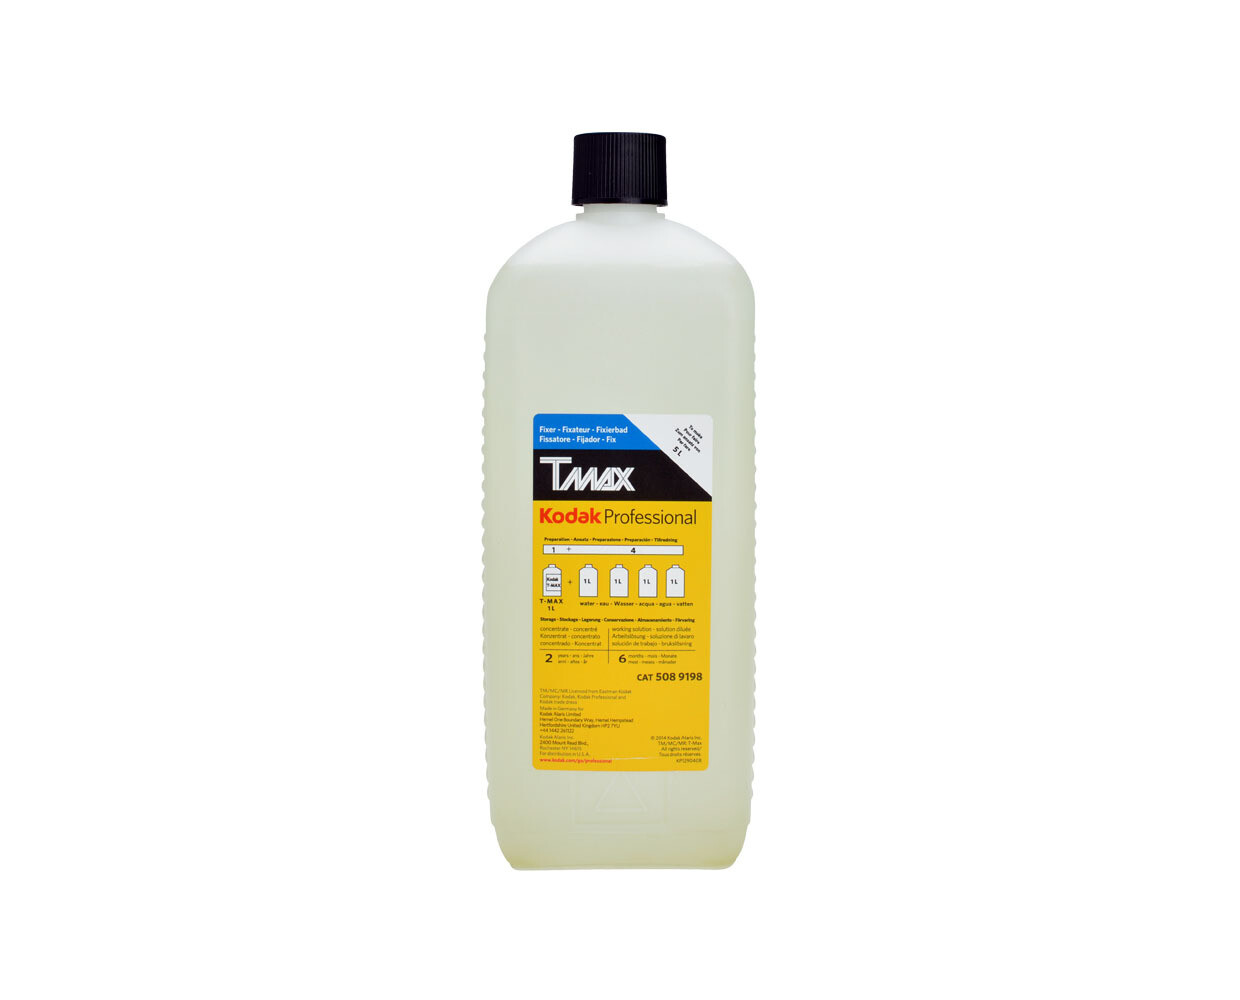 Kodak T-Max Fixateur for 5 liter (5089198) to be used before 02/2023